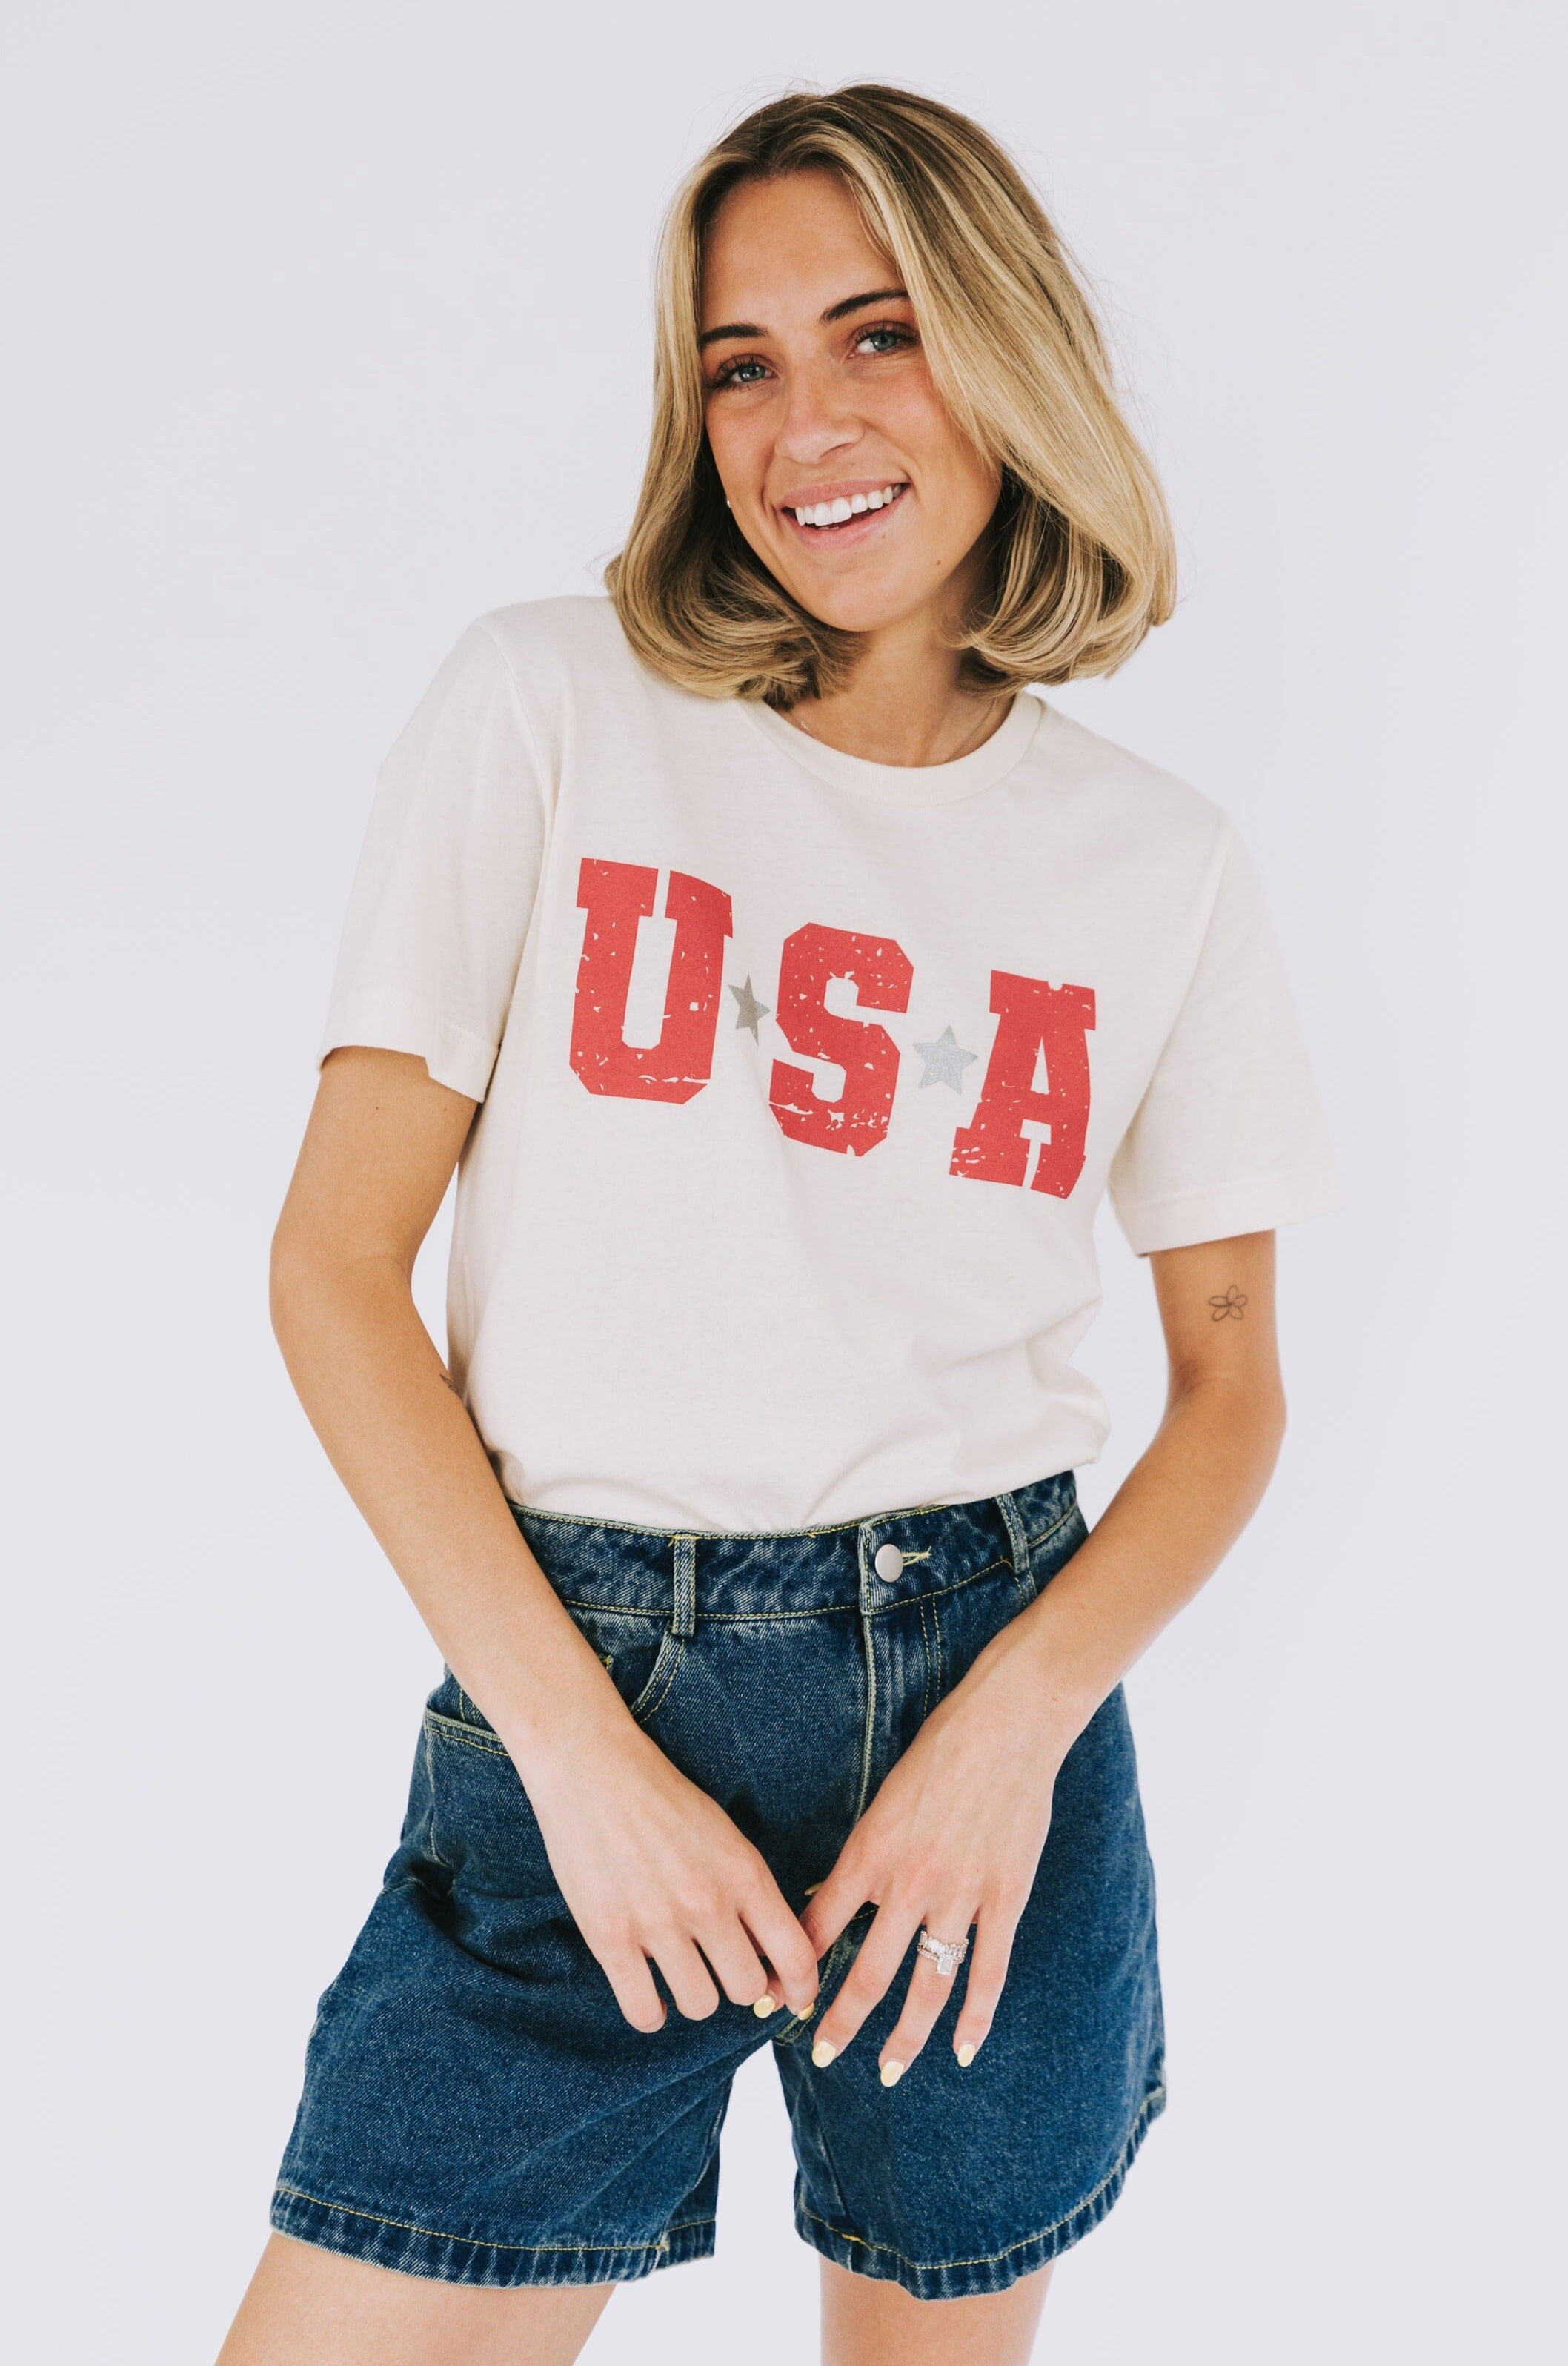 U.S.A. Tee - Extended Sizing!